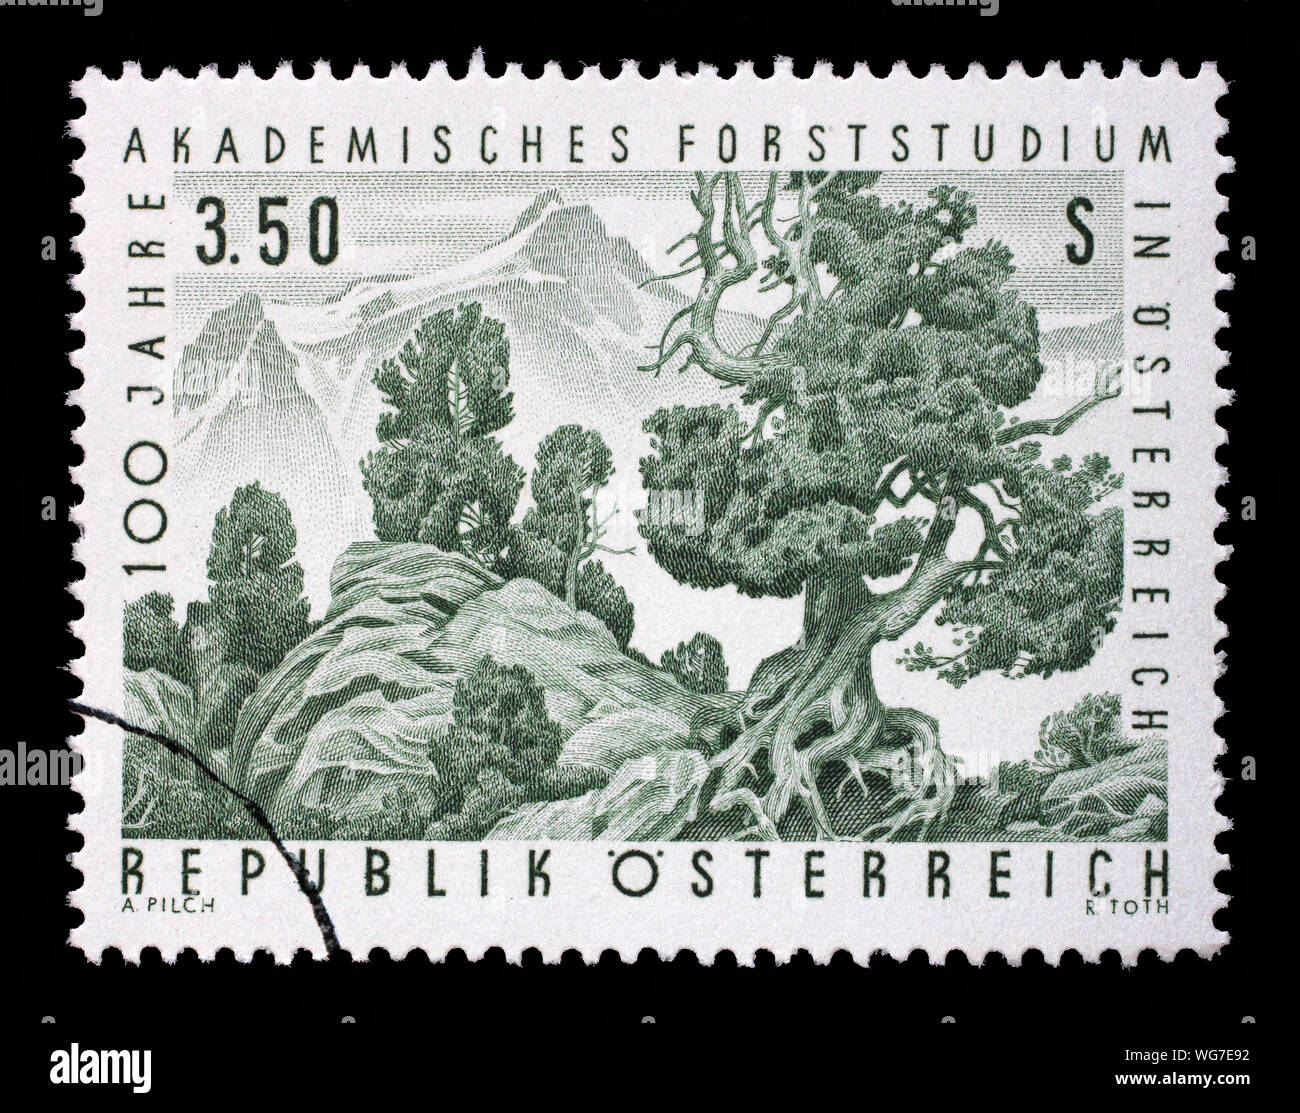 Stamp issued in the Austria shows the Swiss Pine (Pinus cembra) in the upper treeline of a forest, the 100th Anniversary of Academic Forestry Studies Stock Photo